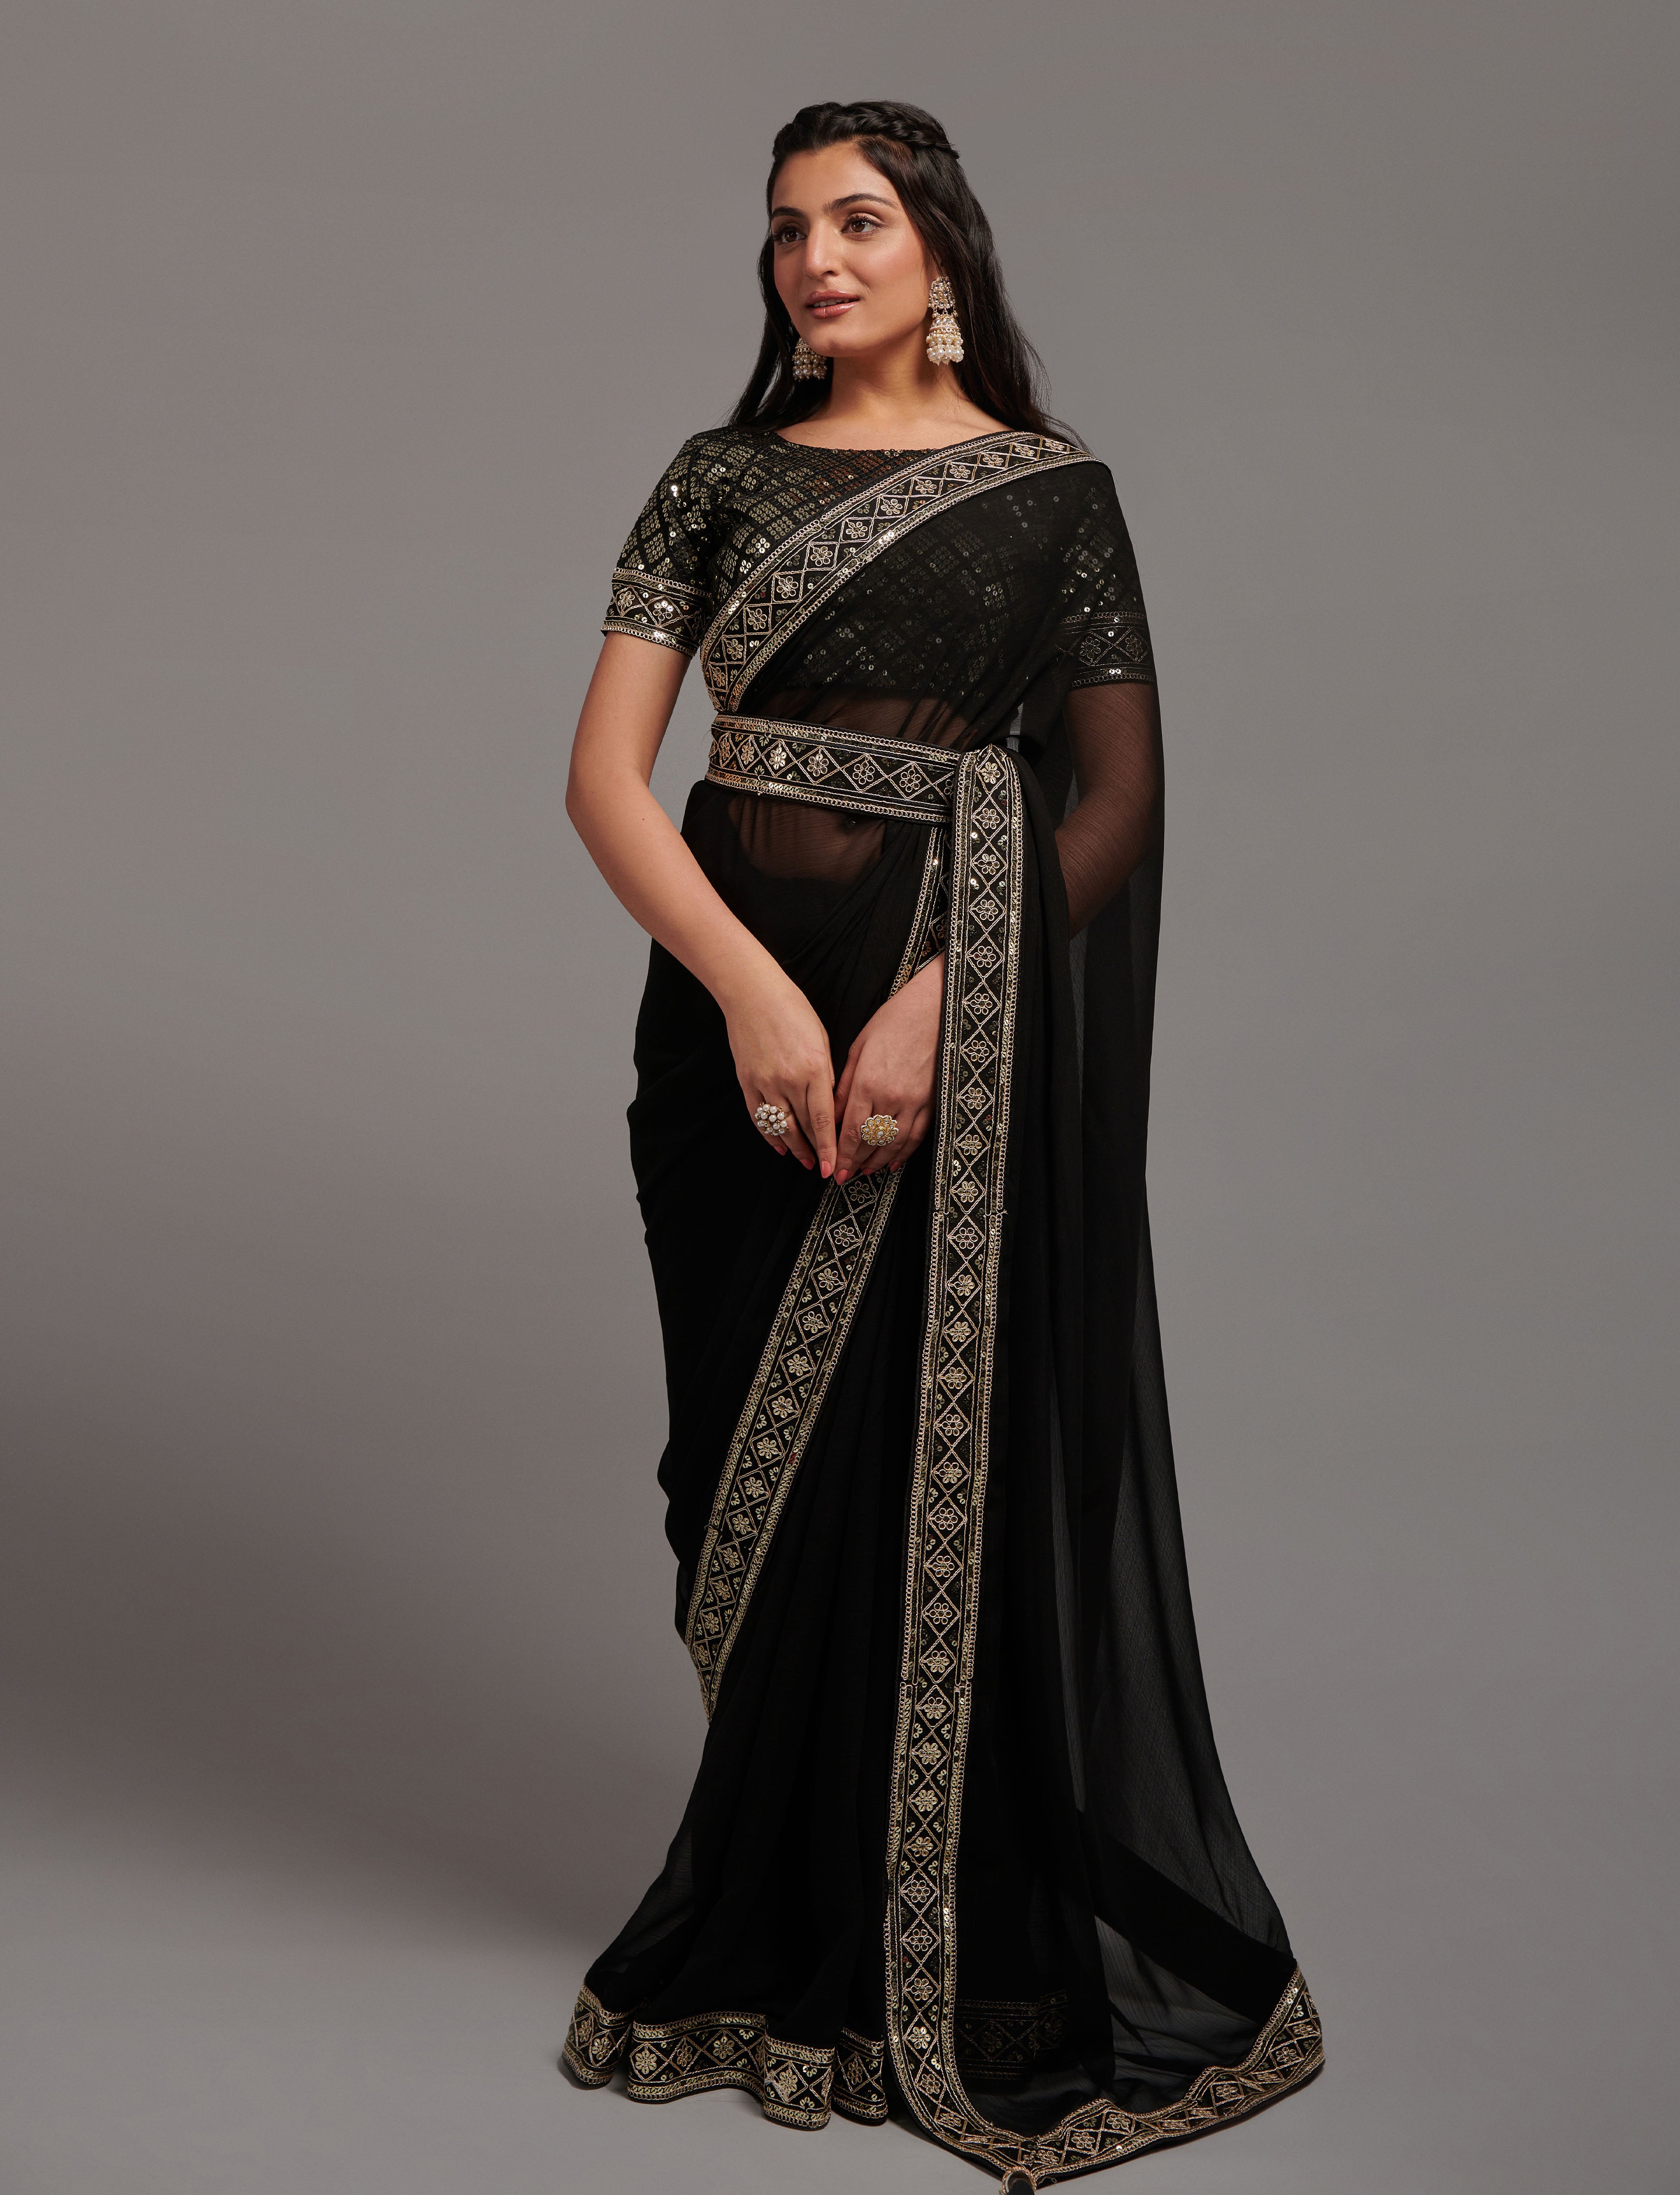 Buy Black Saree In Self Embroidered Net With Tasseled Cape Online - Kalki  Fashion